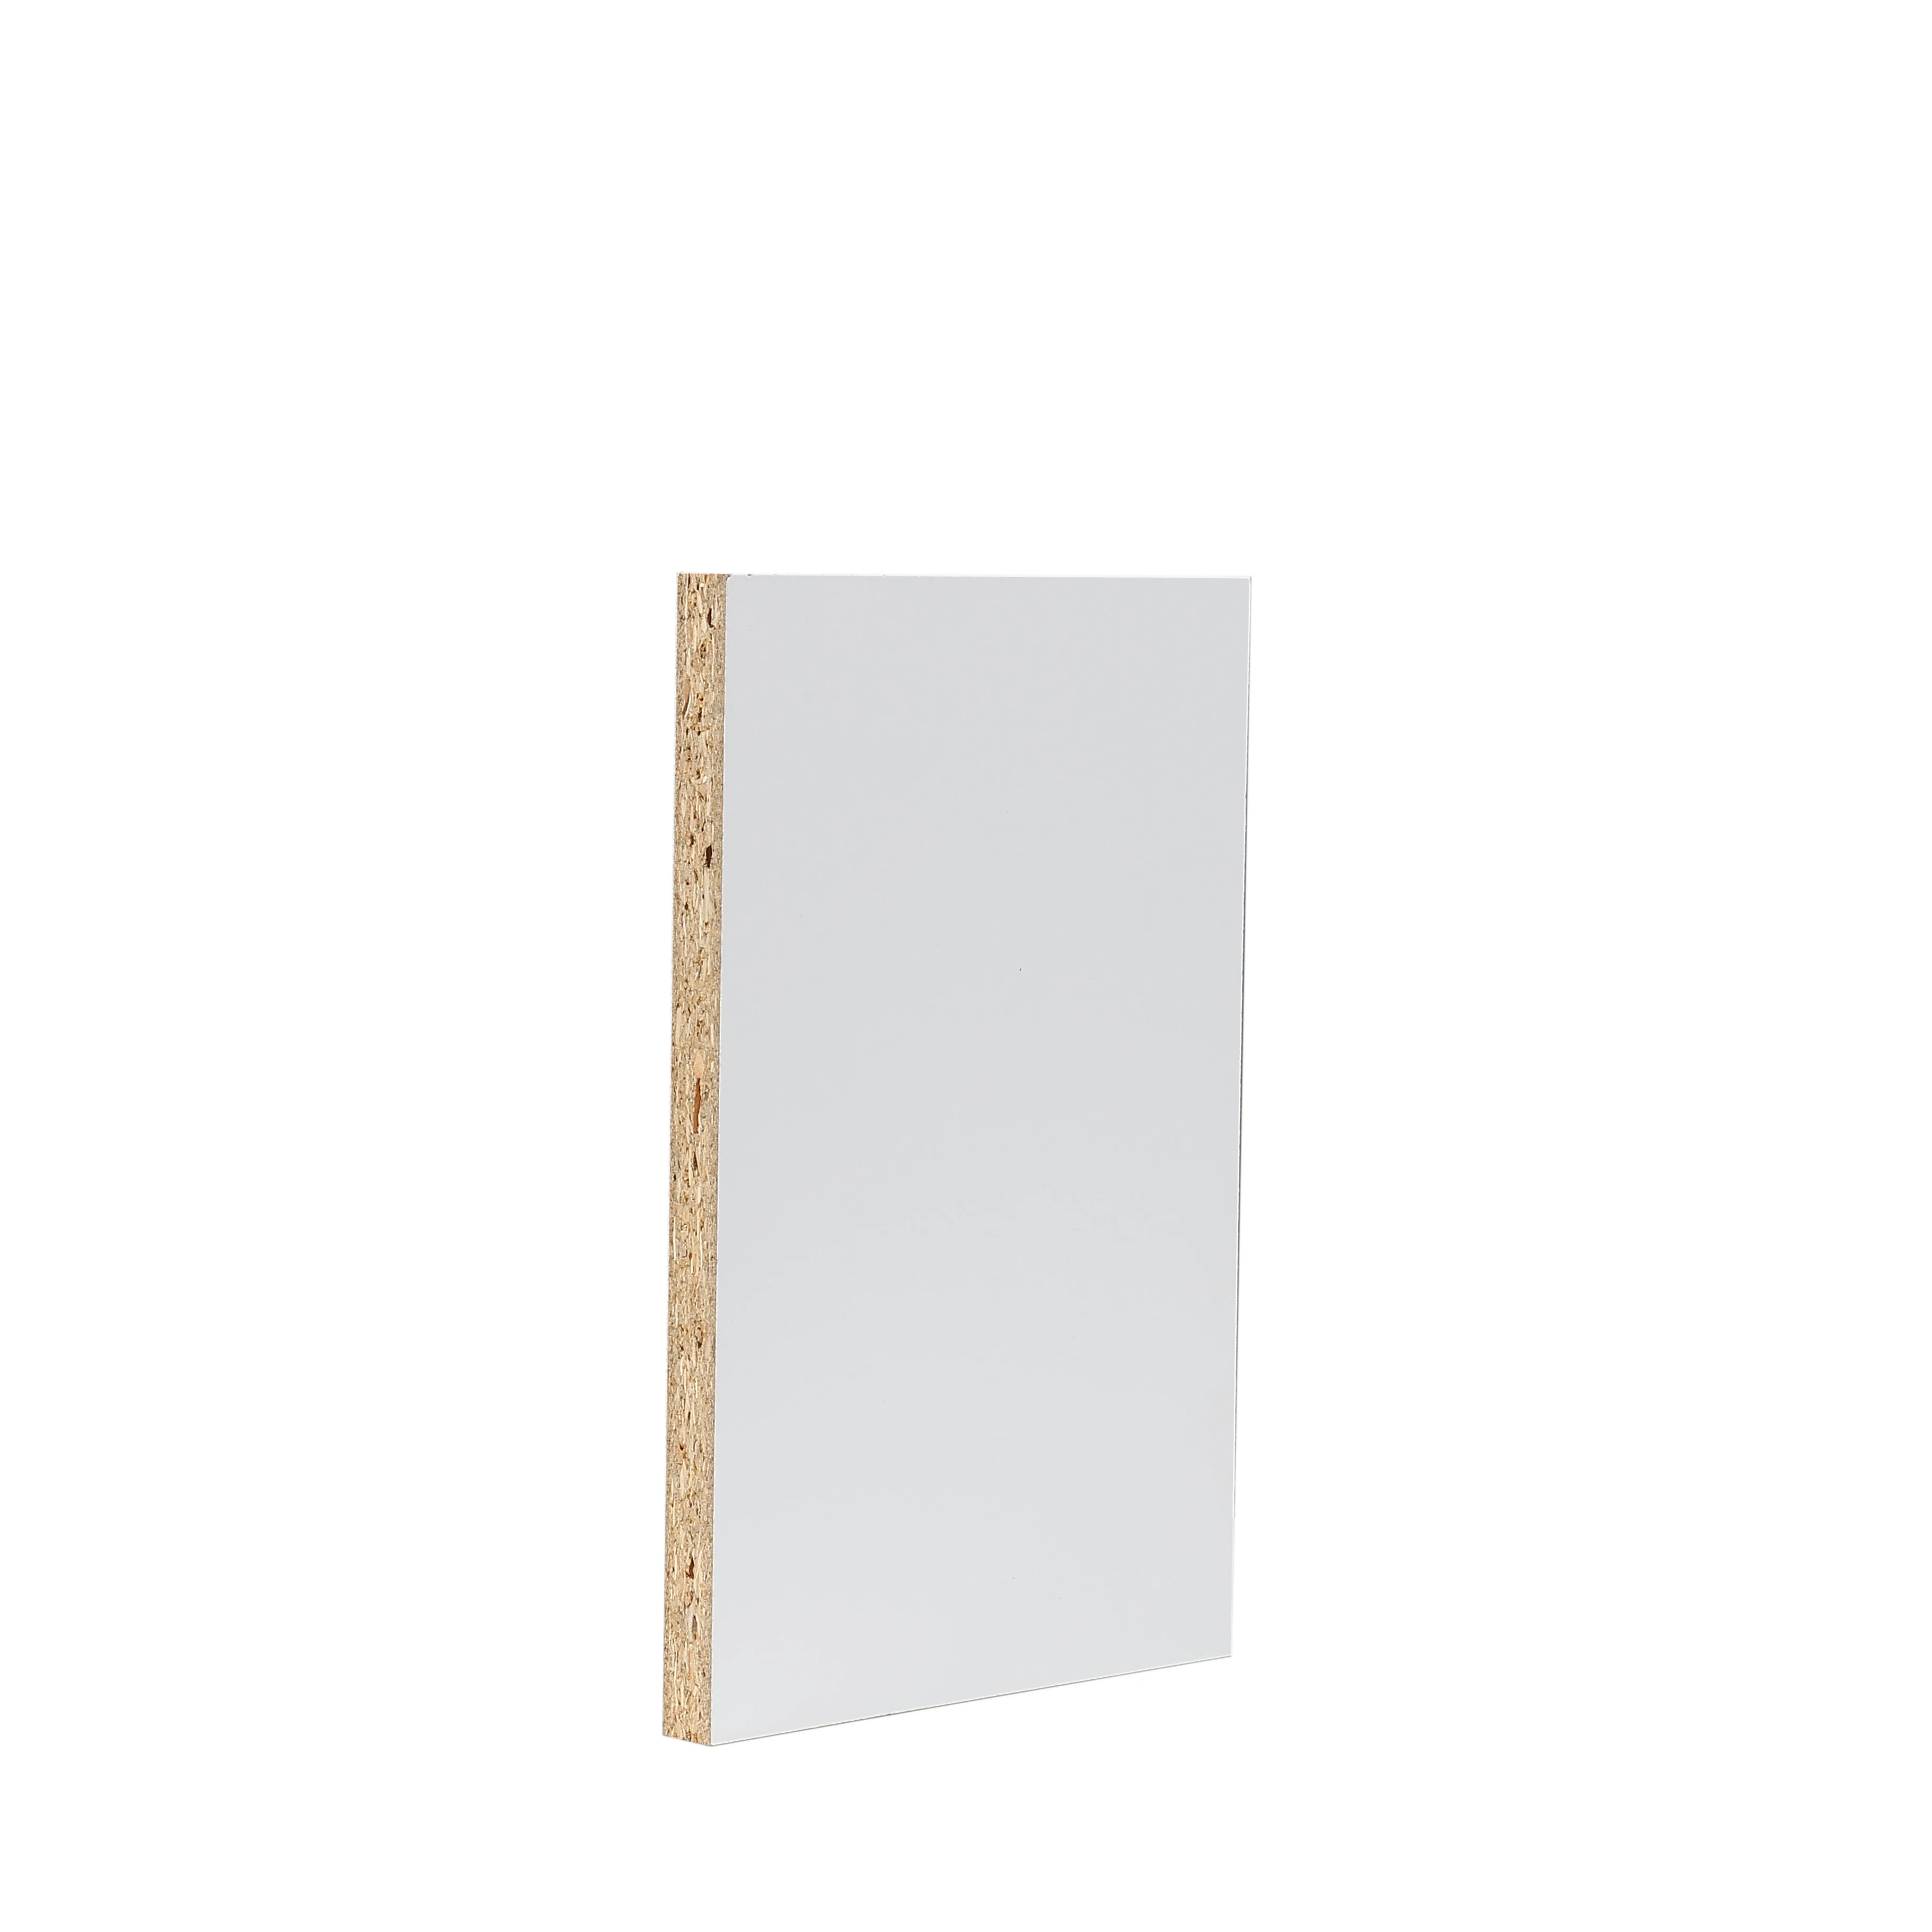 
18mm Melamine laminated particle board e1 Furniture Cabinet Use Moisture Proof Flakeboards Chip board sheets 